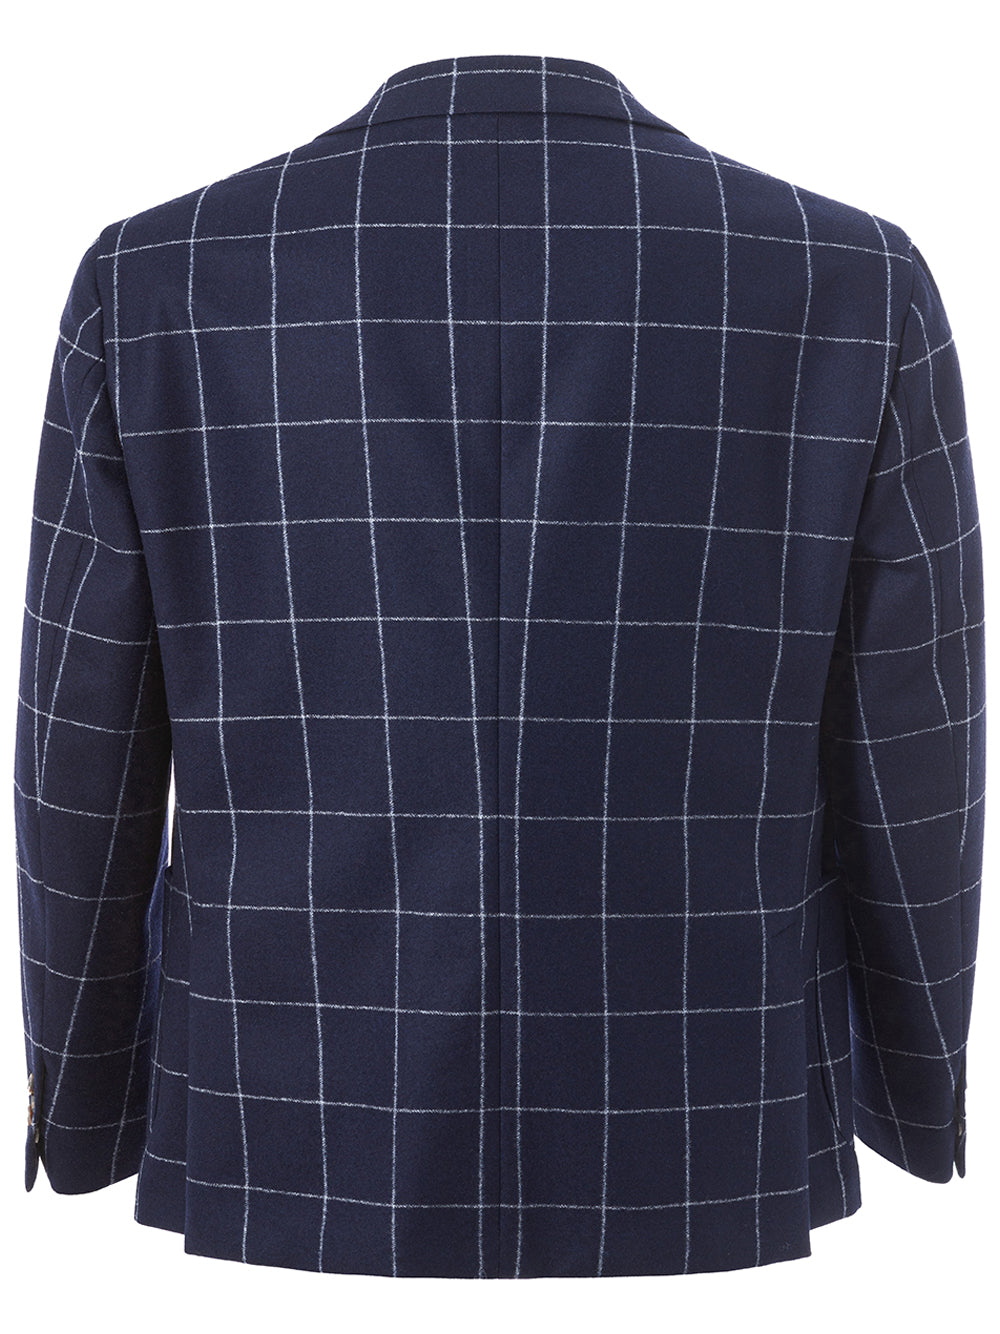 Blue wool jacket with contrasting checks